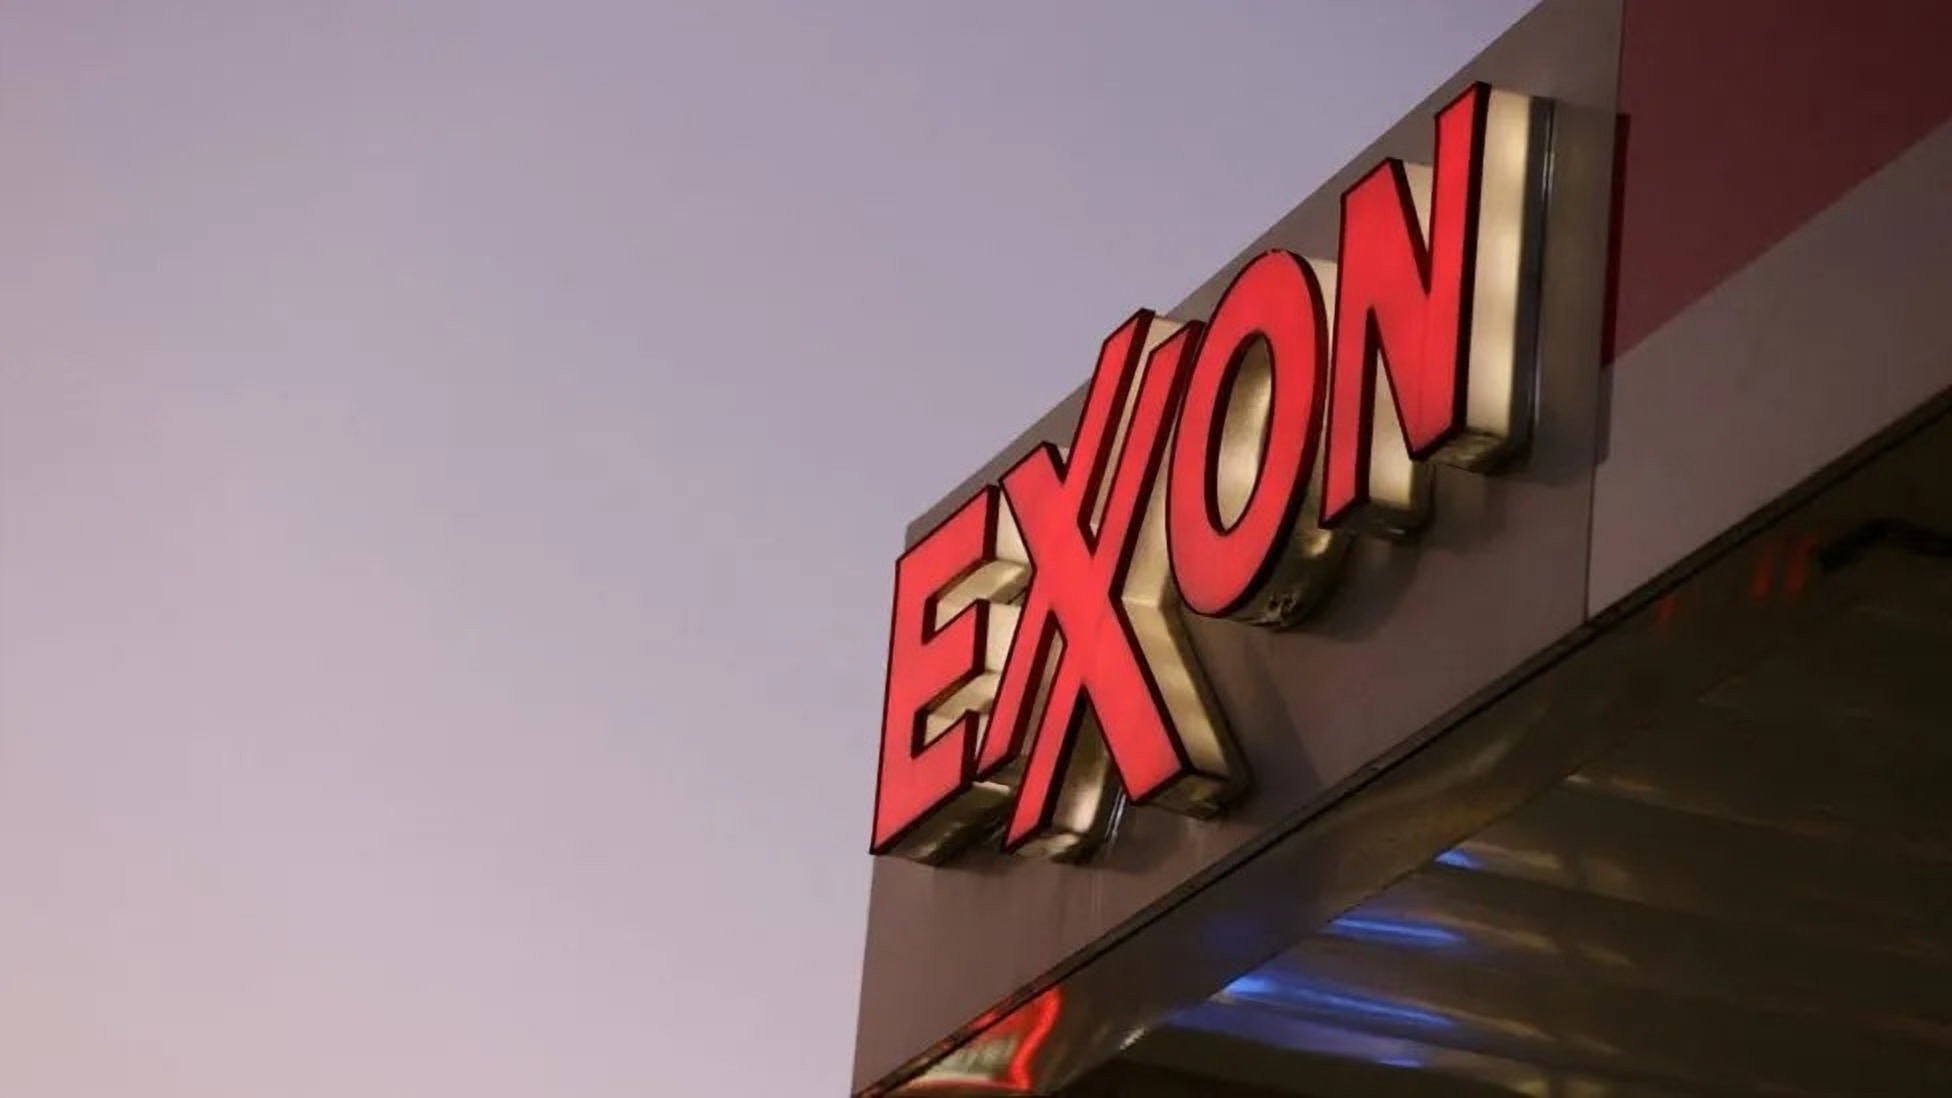 KnowESG_Exxon Sues Investors to Silence Climate Proposal